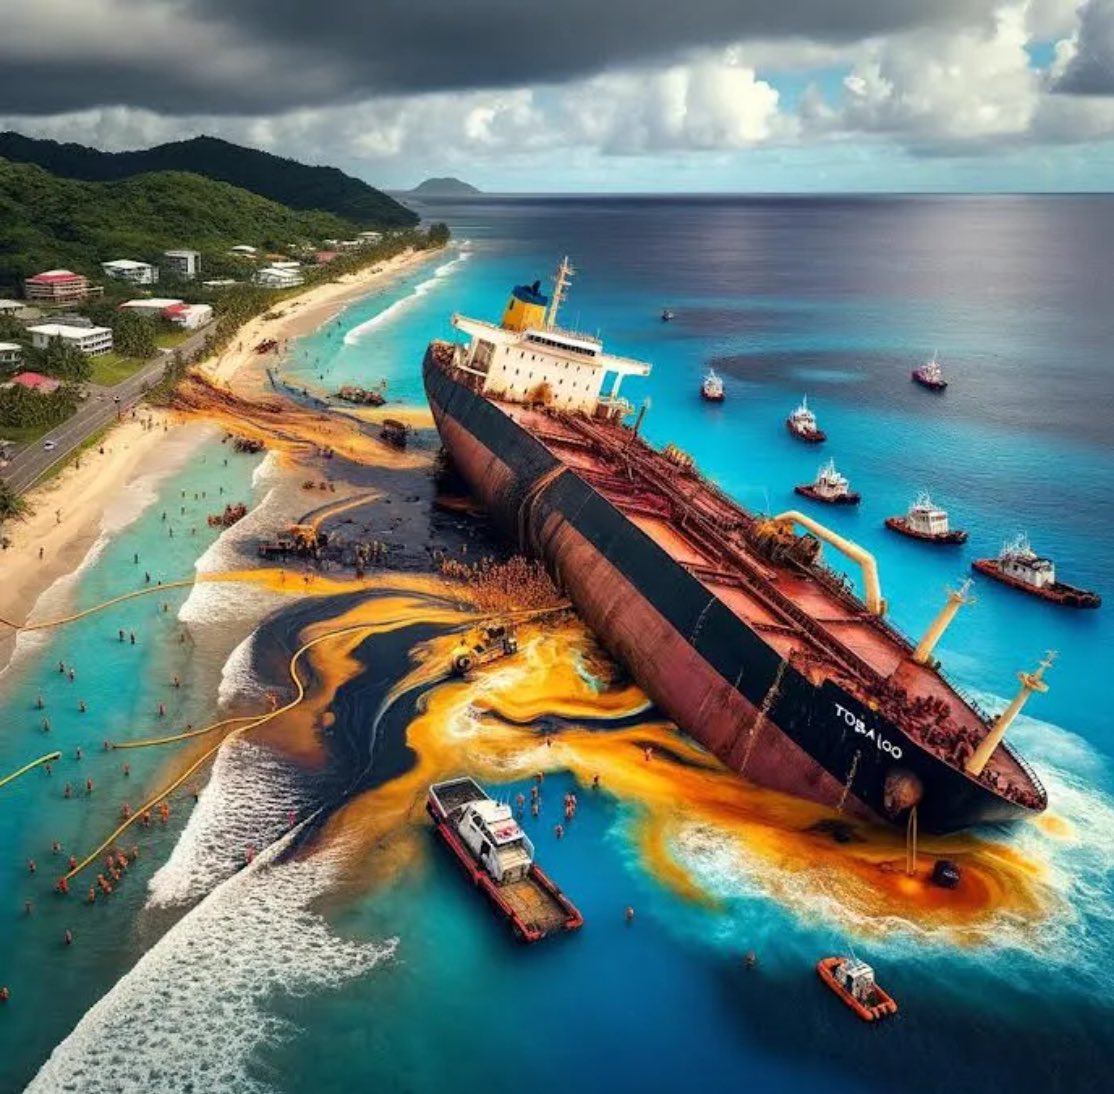 Industrial civilization strikes again. Another paradise destroyed. #Trinidad and #Tobago has declared a national emergency due to a massive tanker #oil spill. 15 kilometers of Tobago's southwest coast ruined. “Leave the World Behind” stuff here.